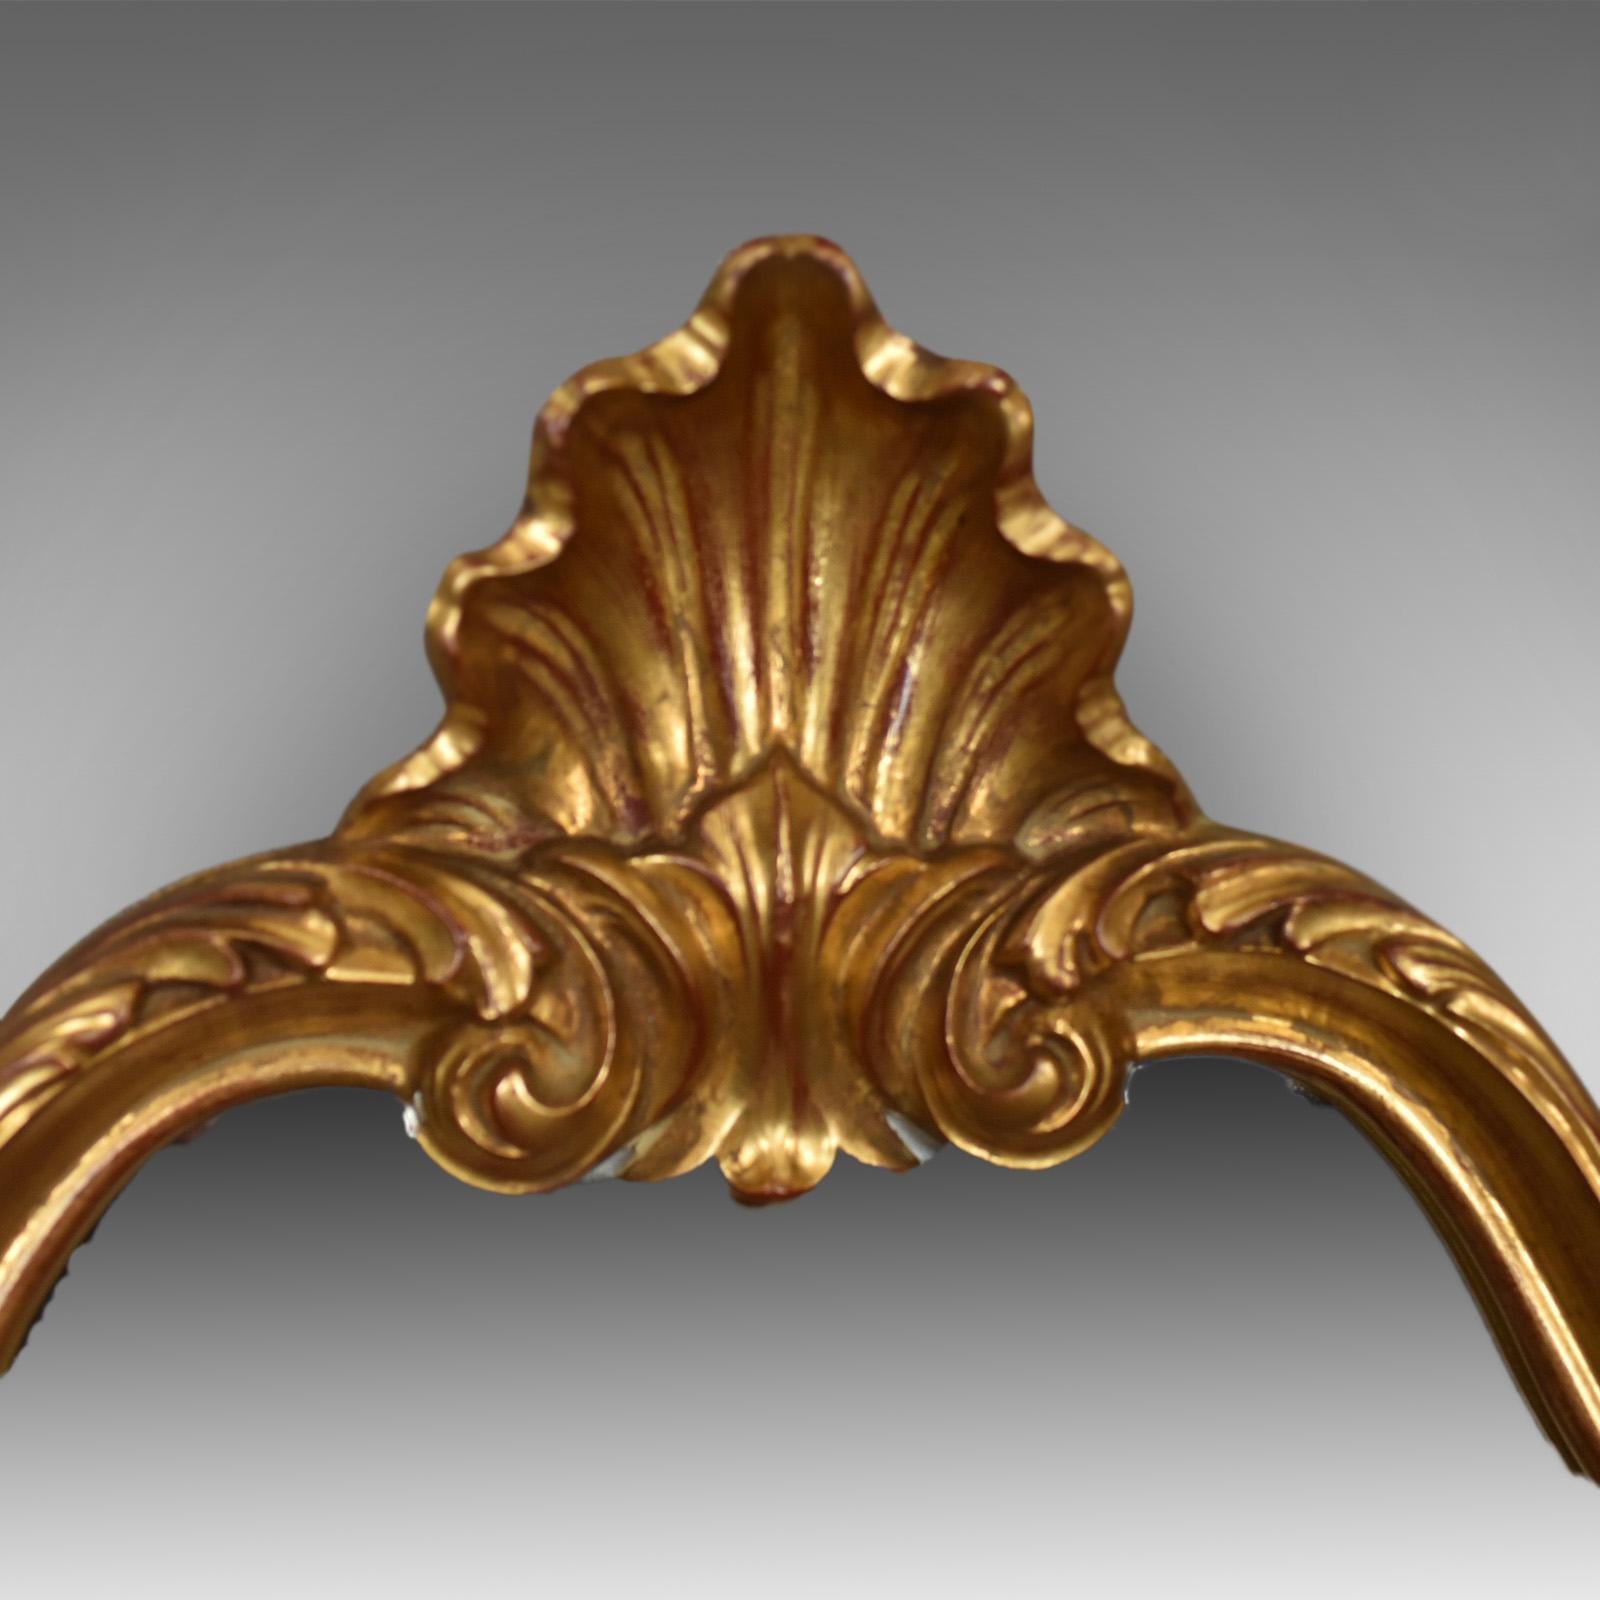 Giltwood Vintage Wall Mirror, Victorian Rococo Revival Manner, English, Late 20th Century